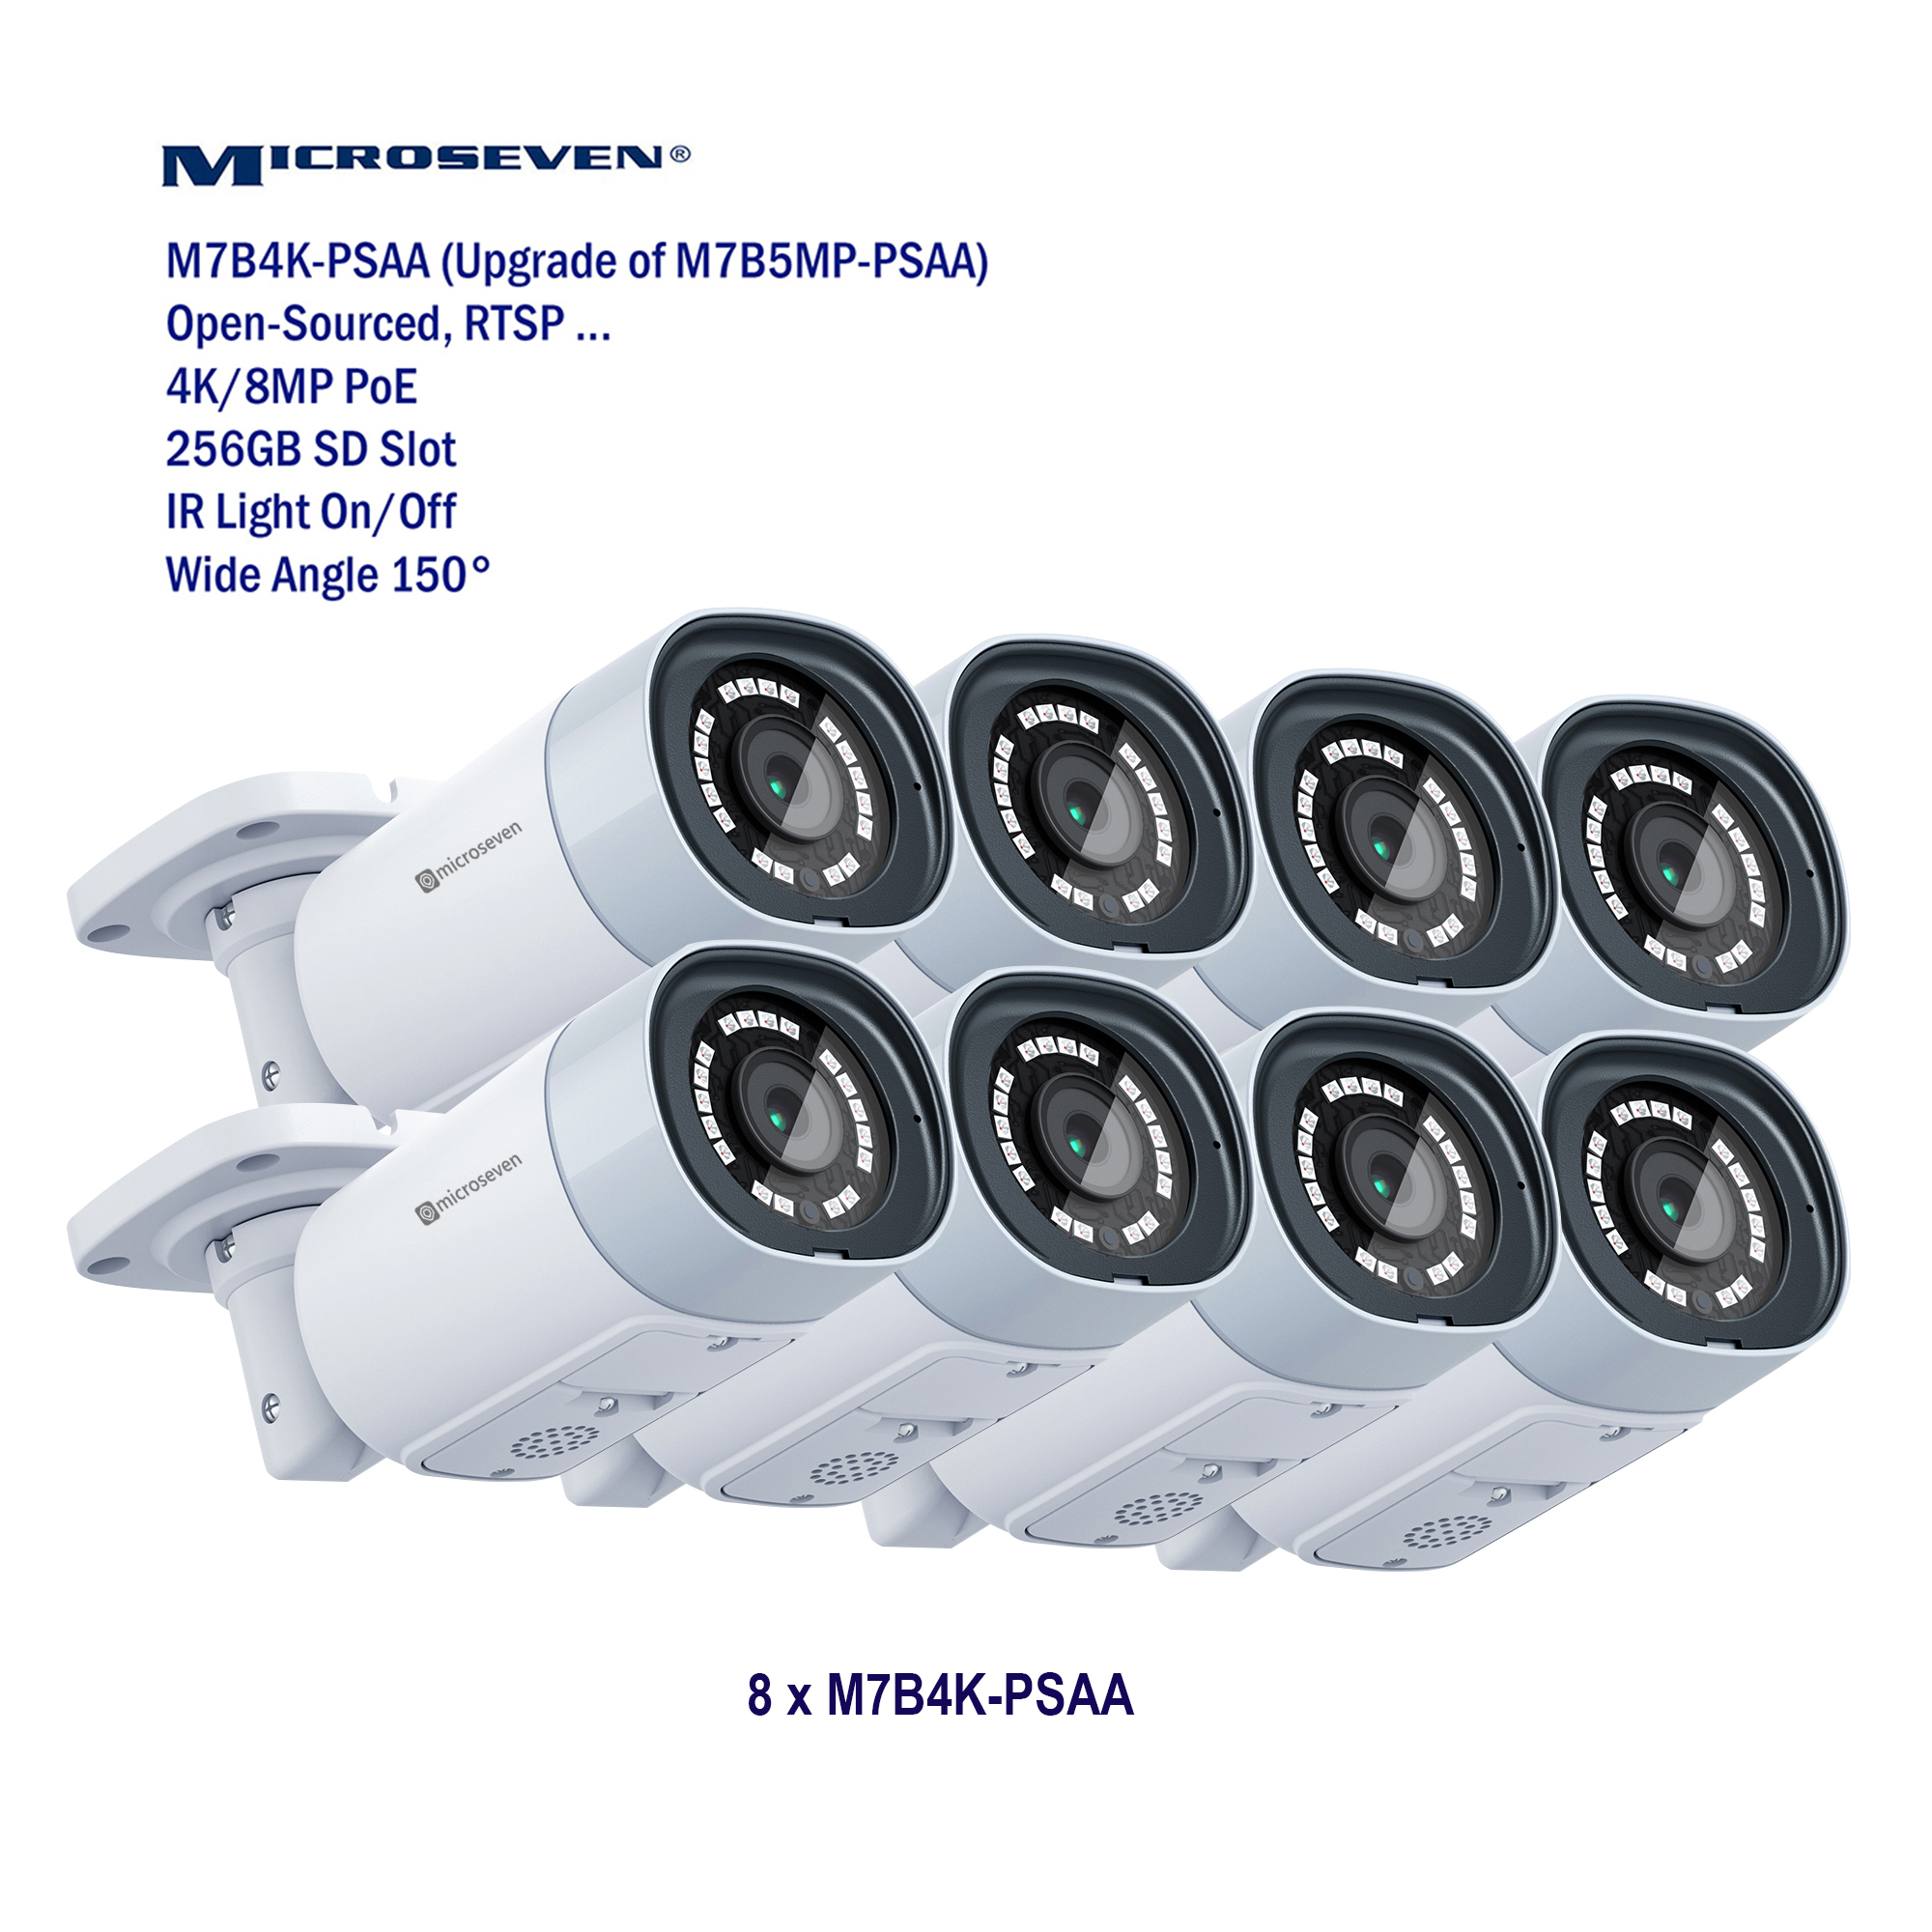 MICROSEVEN 8MP 8CH PoE Home Security Camera System with Audio & Works with Alexa for 24x7 Recording,(8) Outdoor 8MP Bullet PoE IP Cameras, 100ft IR Night, 8 Channel 8MP PoE NVR, Support Upto 8TB HDD